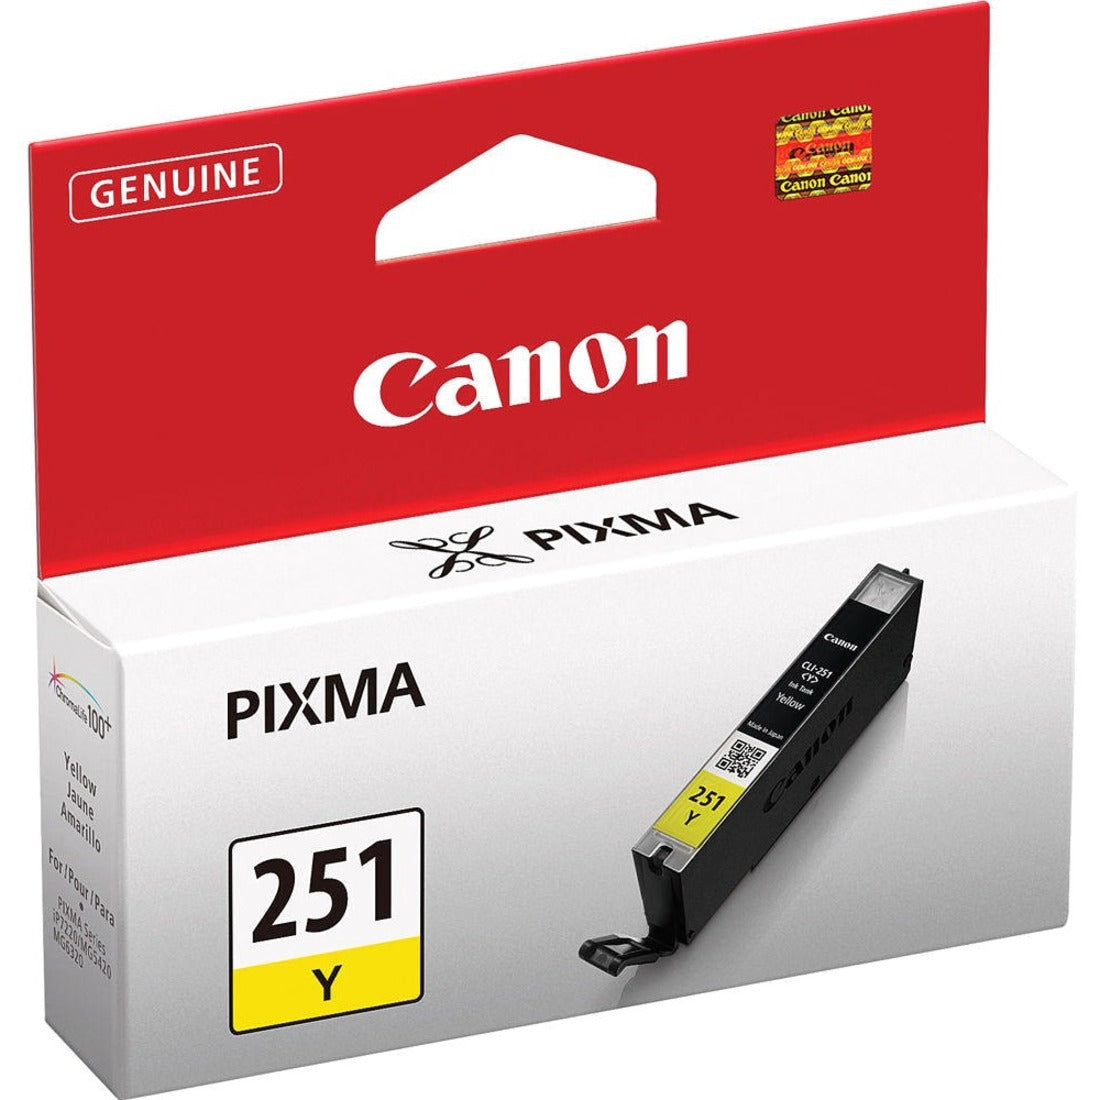 Canon 6516B001 CLI-251Y Yellow Ink Tank, ChromaLife100+, 330 Pages